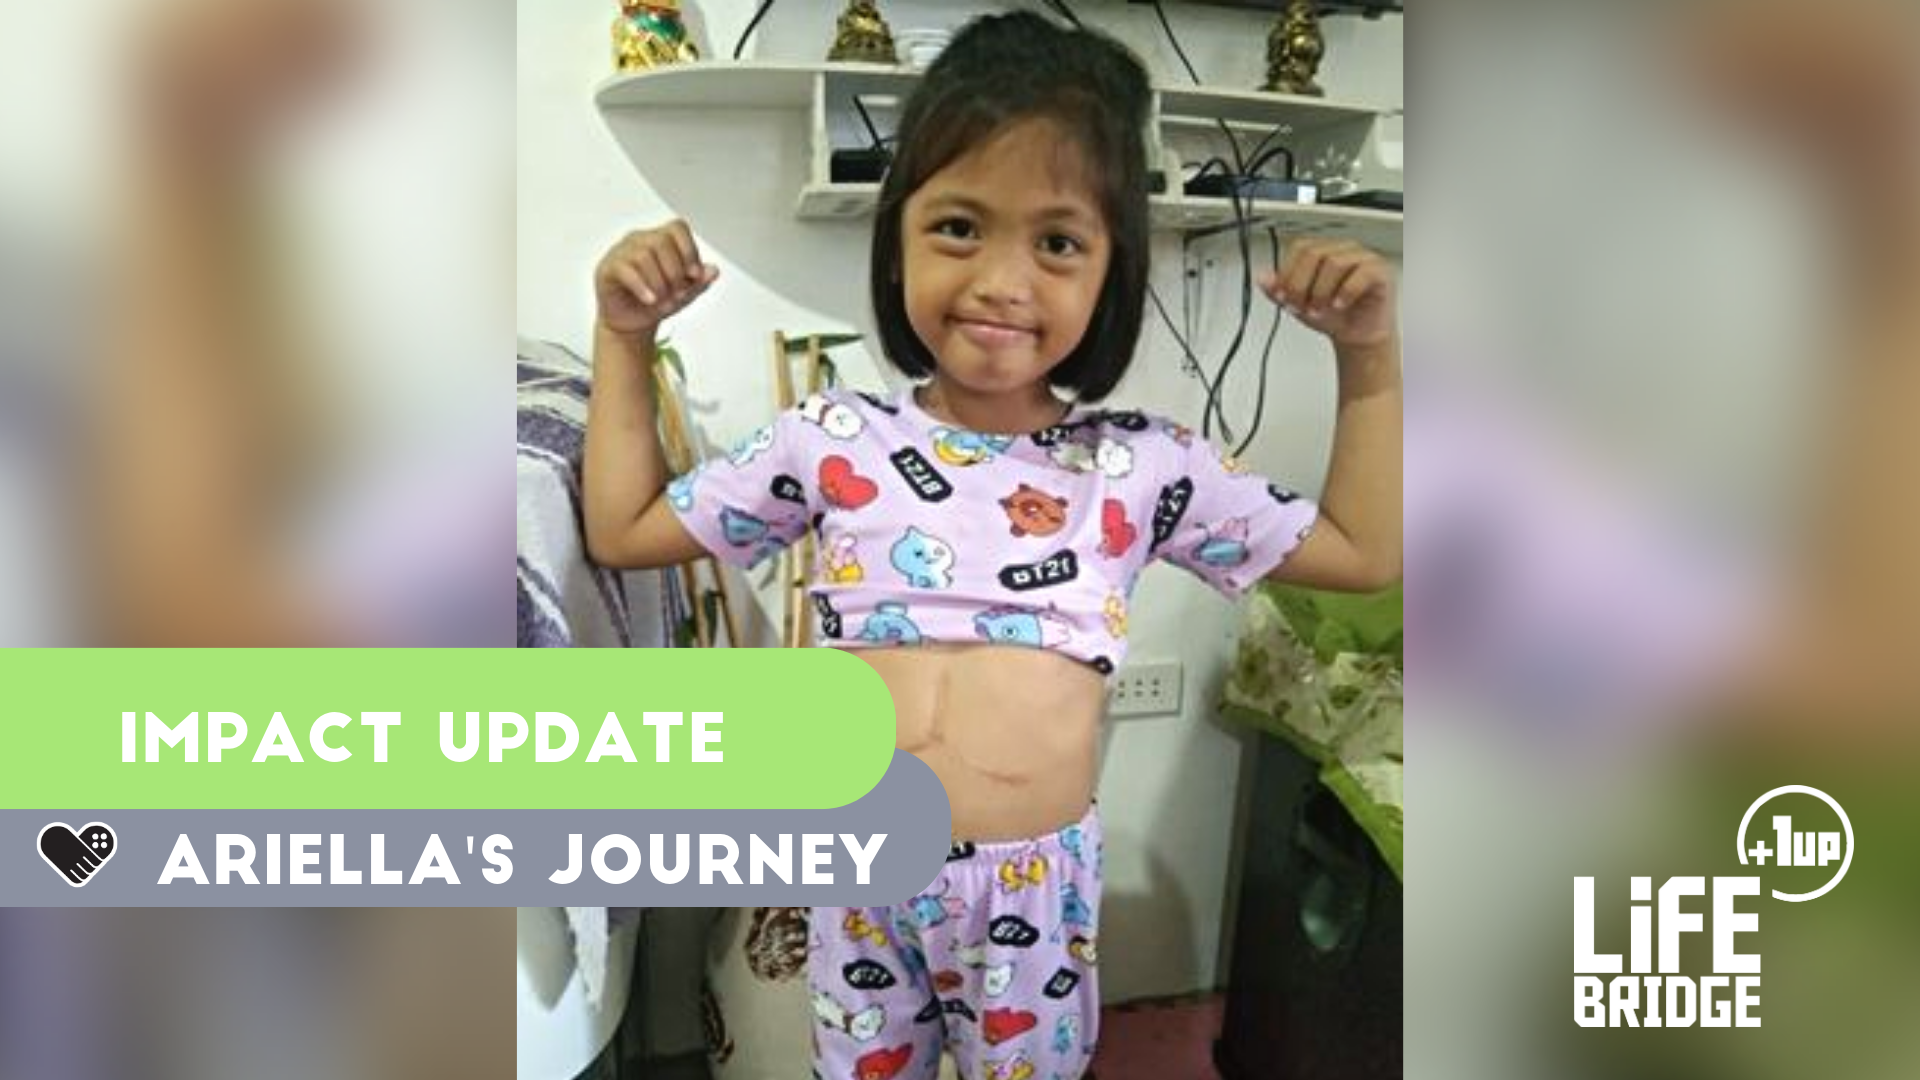 A Ray Of Hope: Ariella's Journey